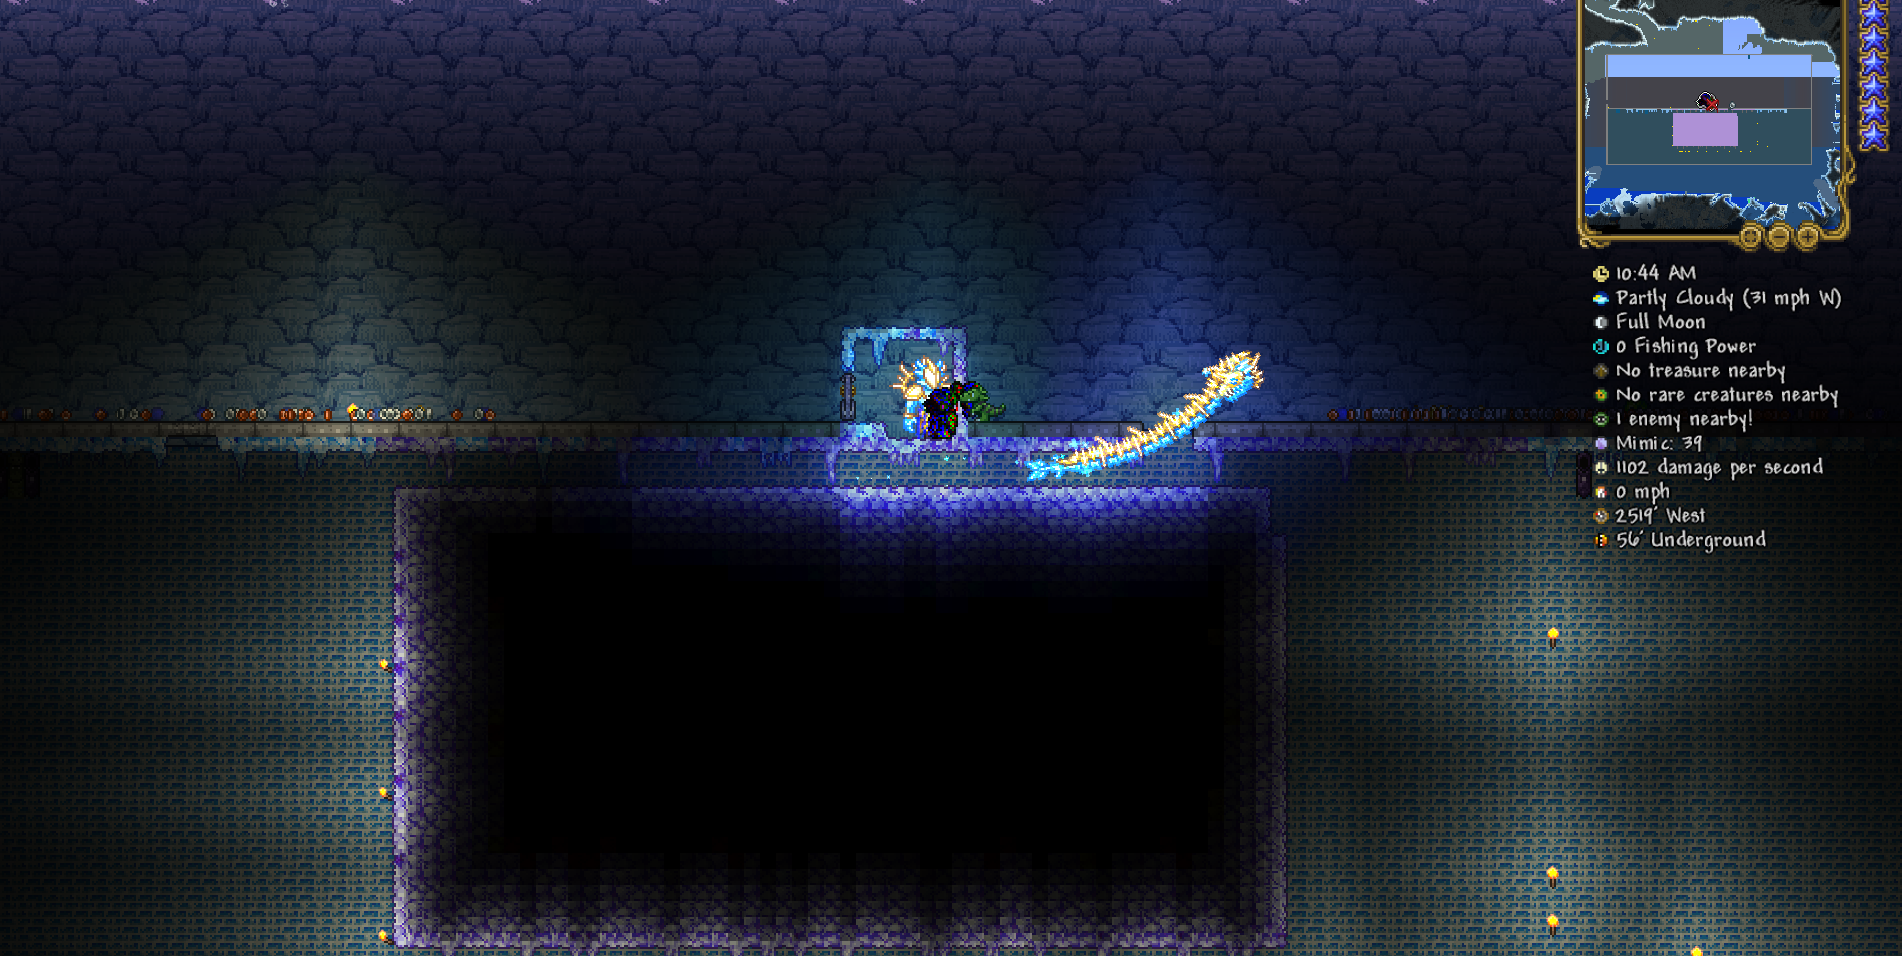 PC - Artificial biome requirement changes? | Terraria Community Forums